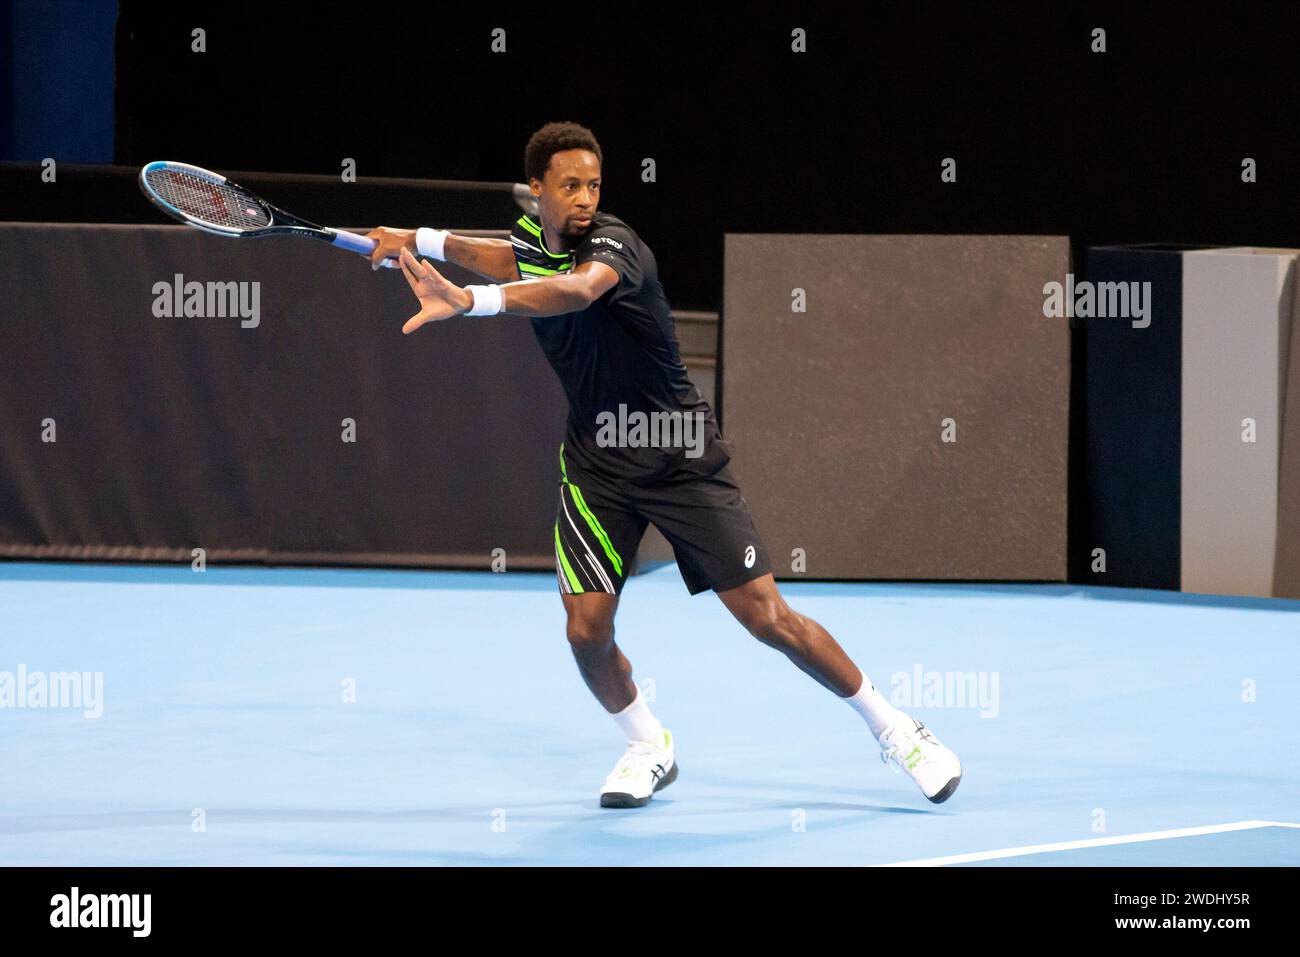 Gael Monfils of France in action during the final of the Sofia Open 2021 ATP 250 indoor tennis tournament on hard courts Stock Photo